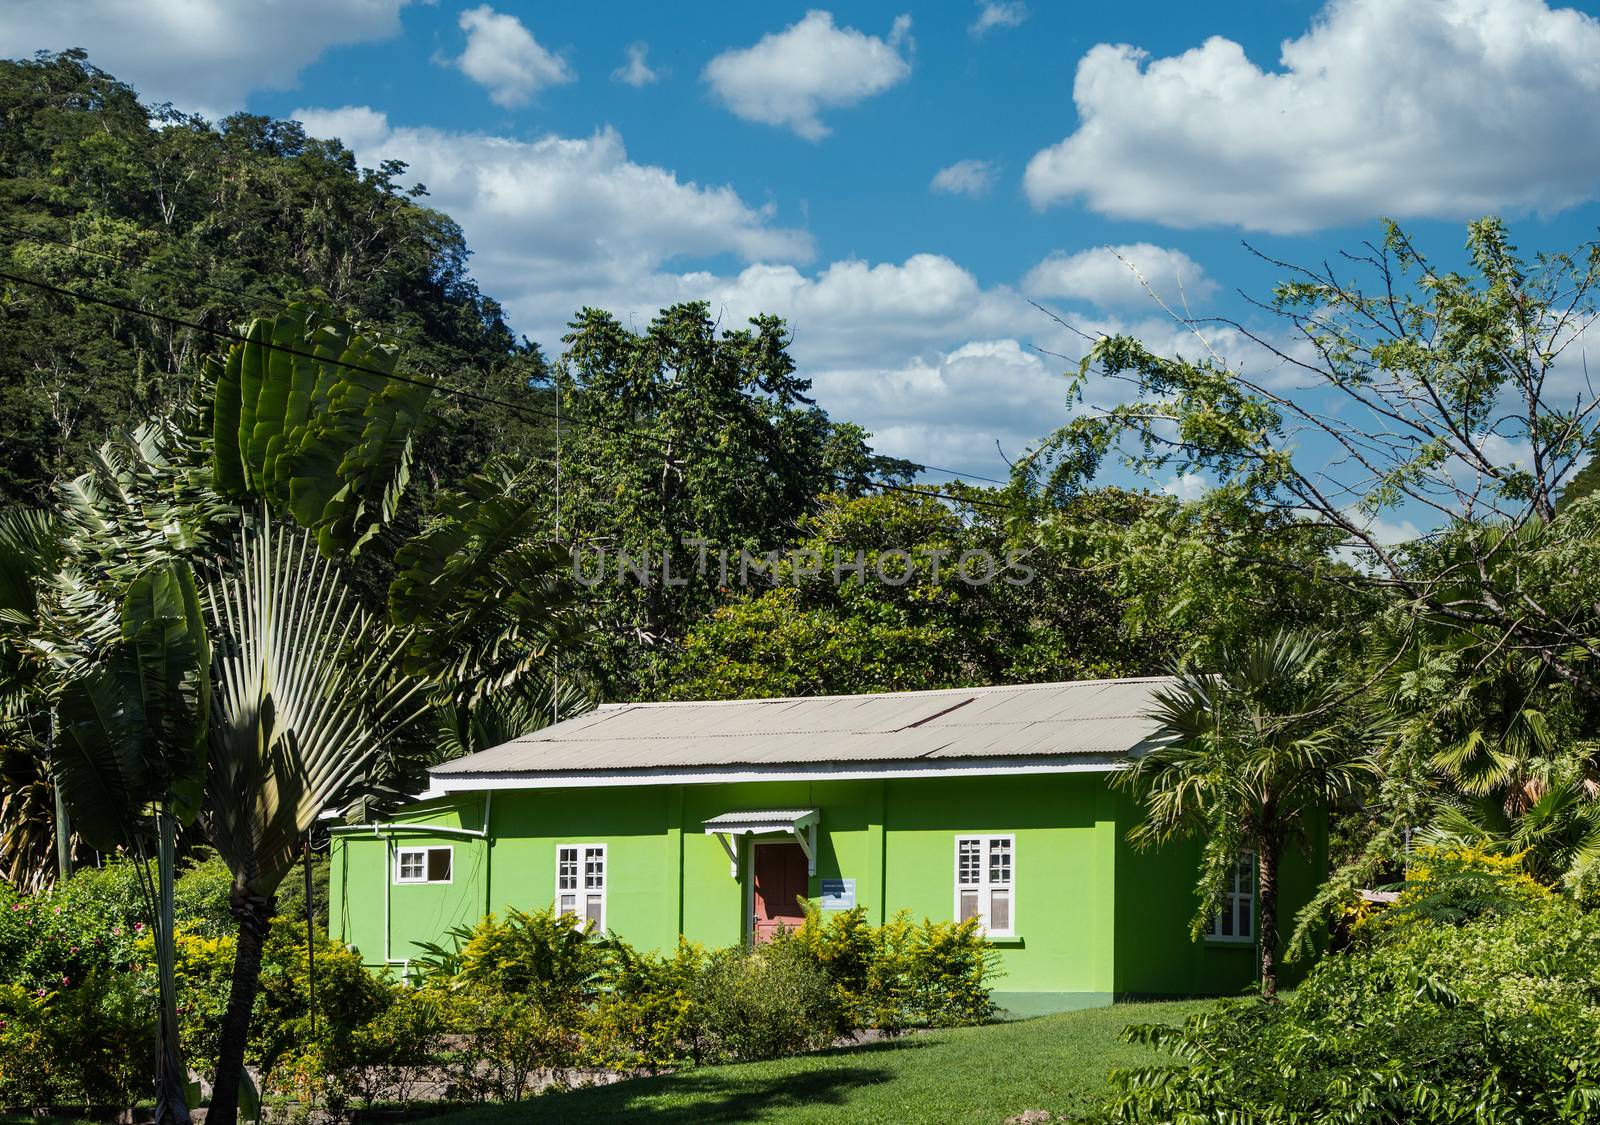 Green Bungalow in Tropical Paradise by dbvirago